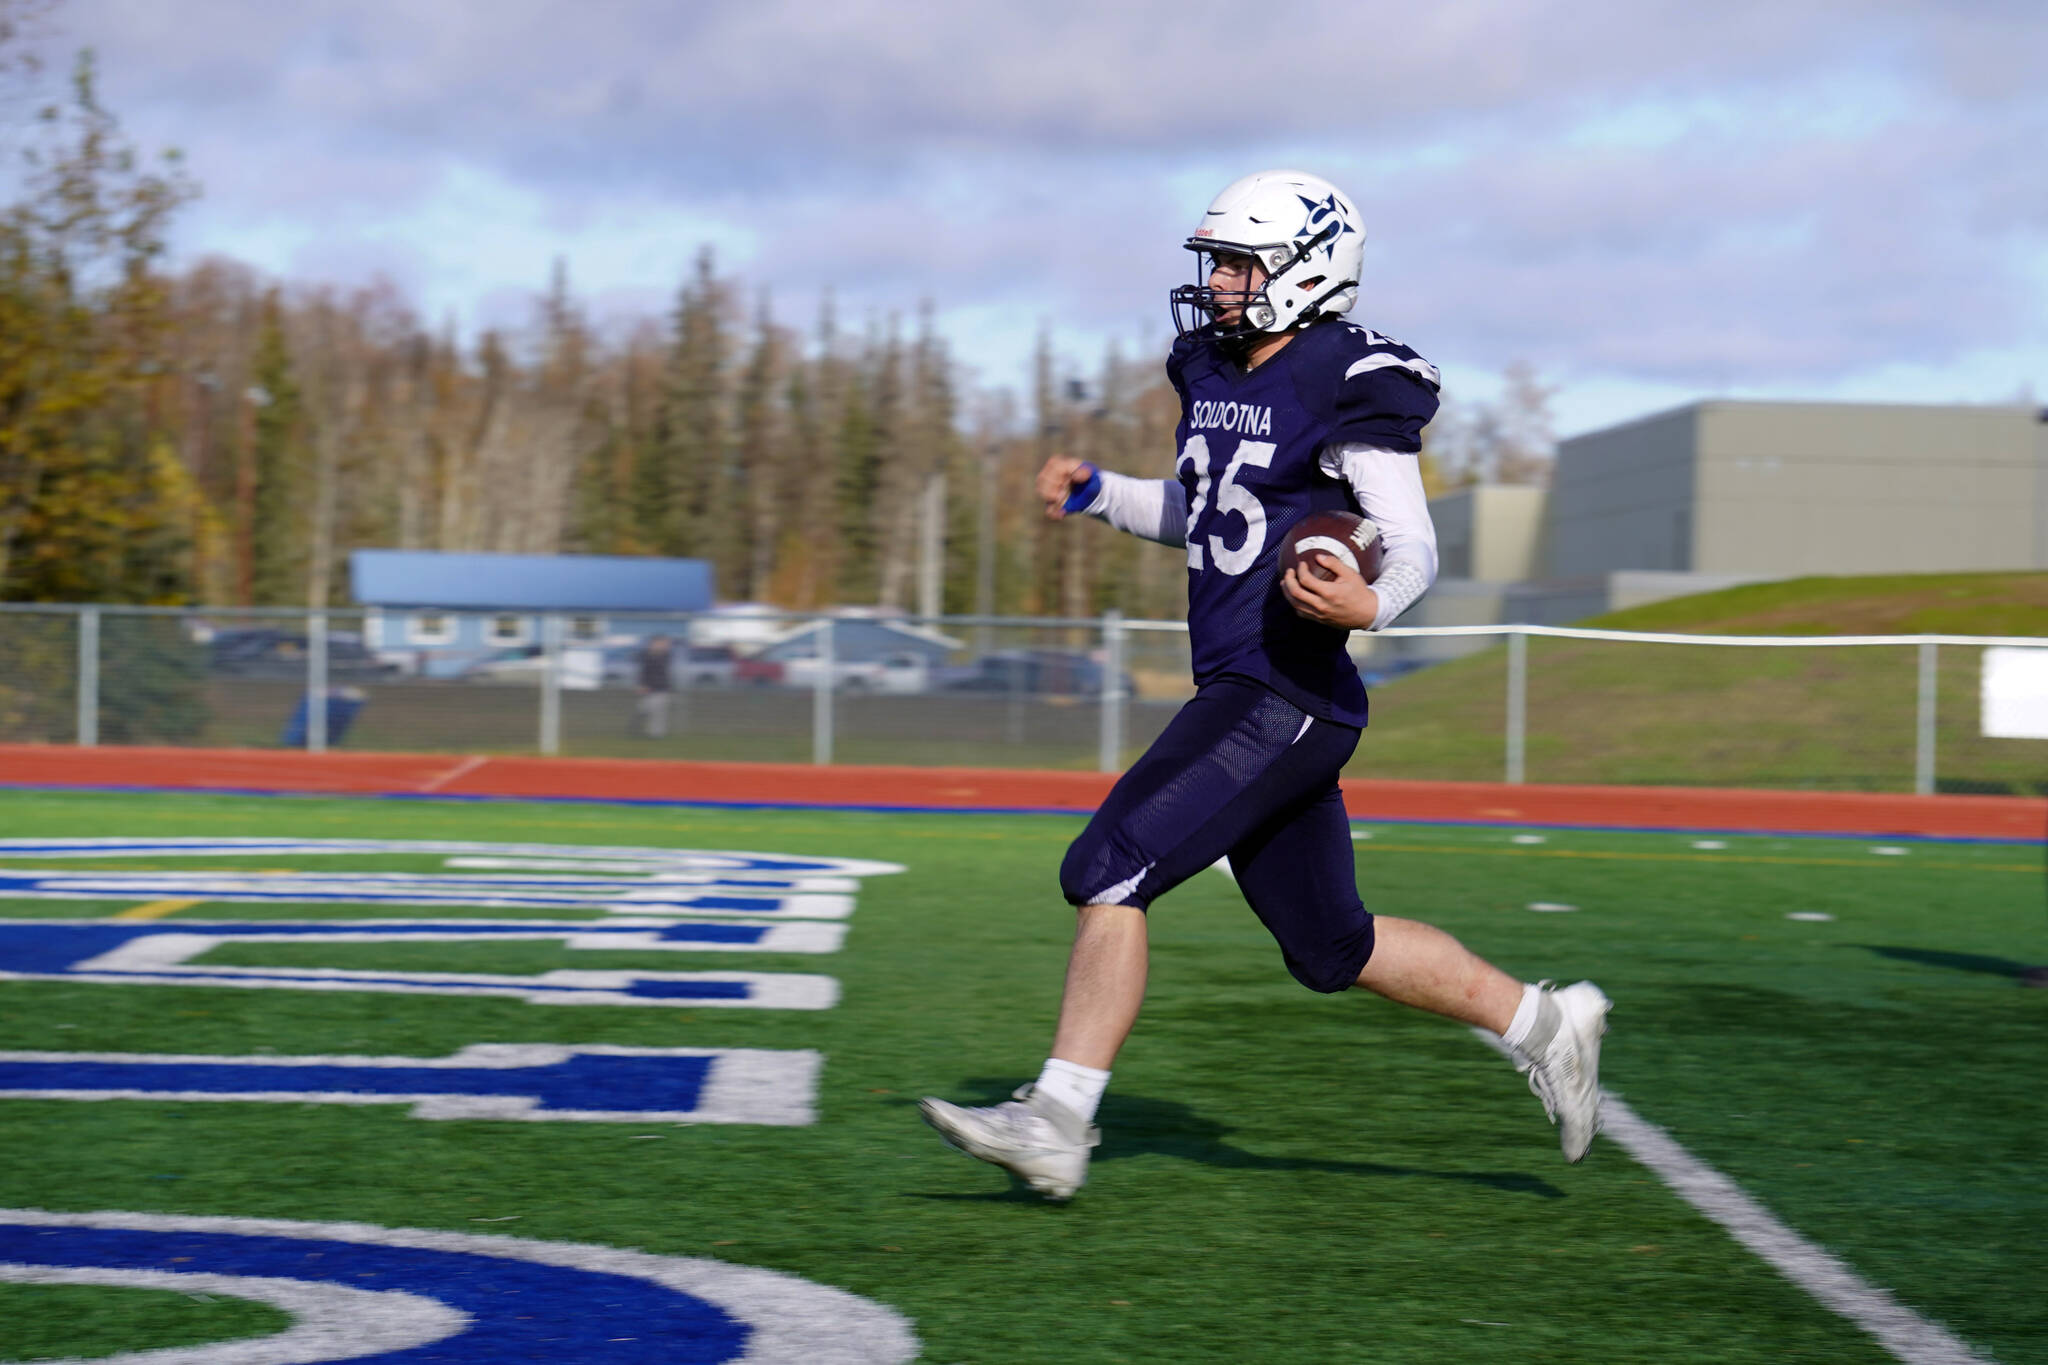 Soldotna’s Gehret Medcoff lands a touchdown during a Division II playoff game at Justin Maile Field in Soldotna, Alaska, on Saturday, Oct. 7, 2023. (Jake Dye/Peninsula Clarion)